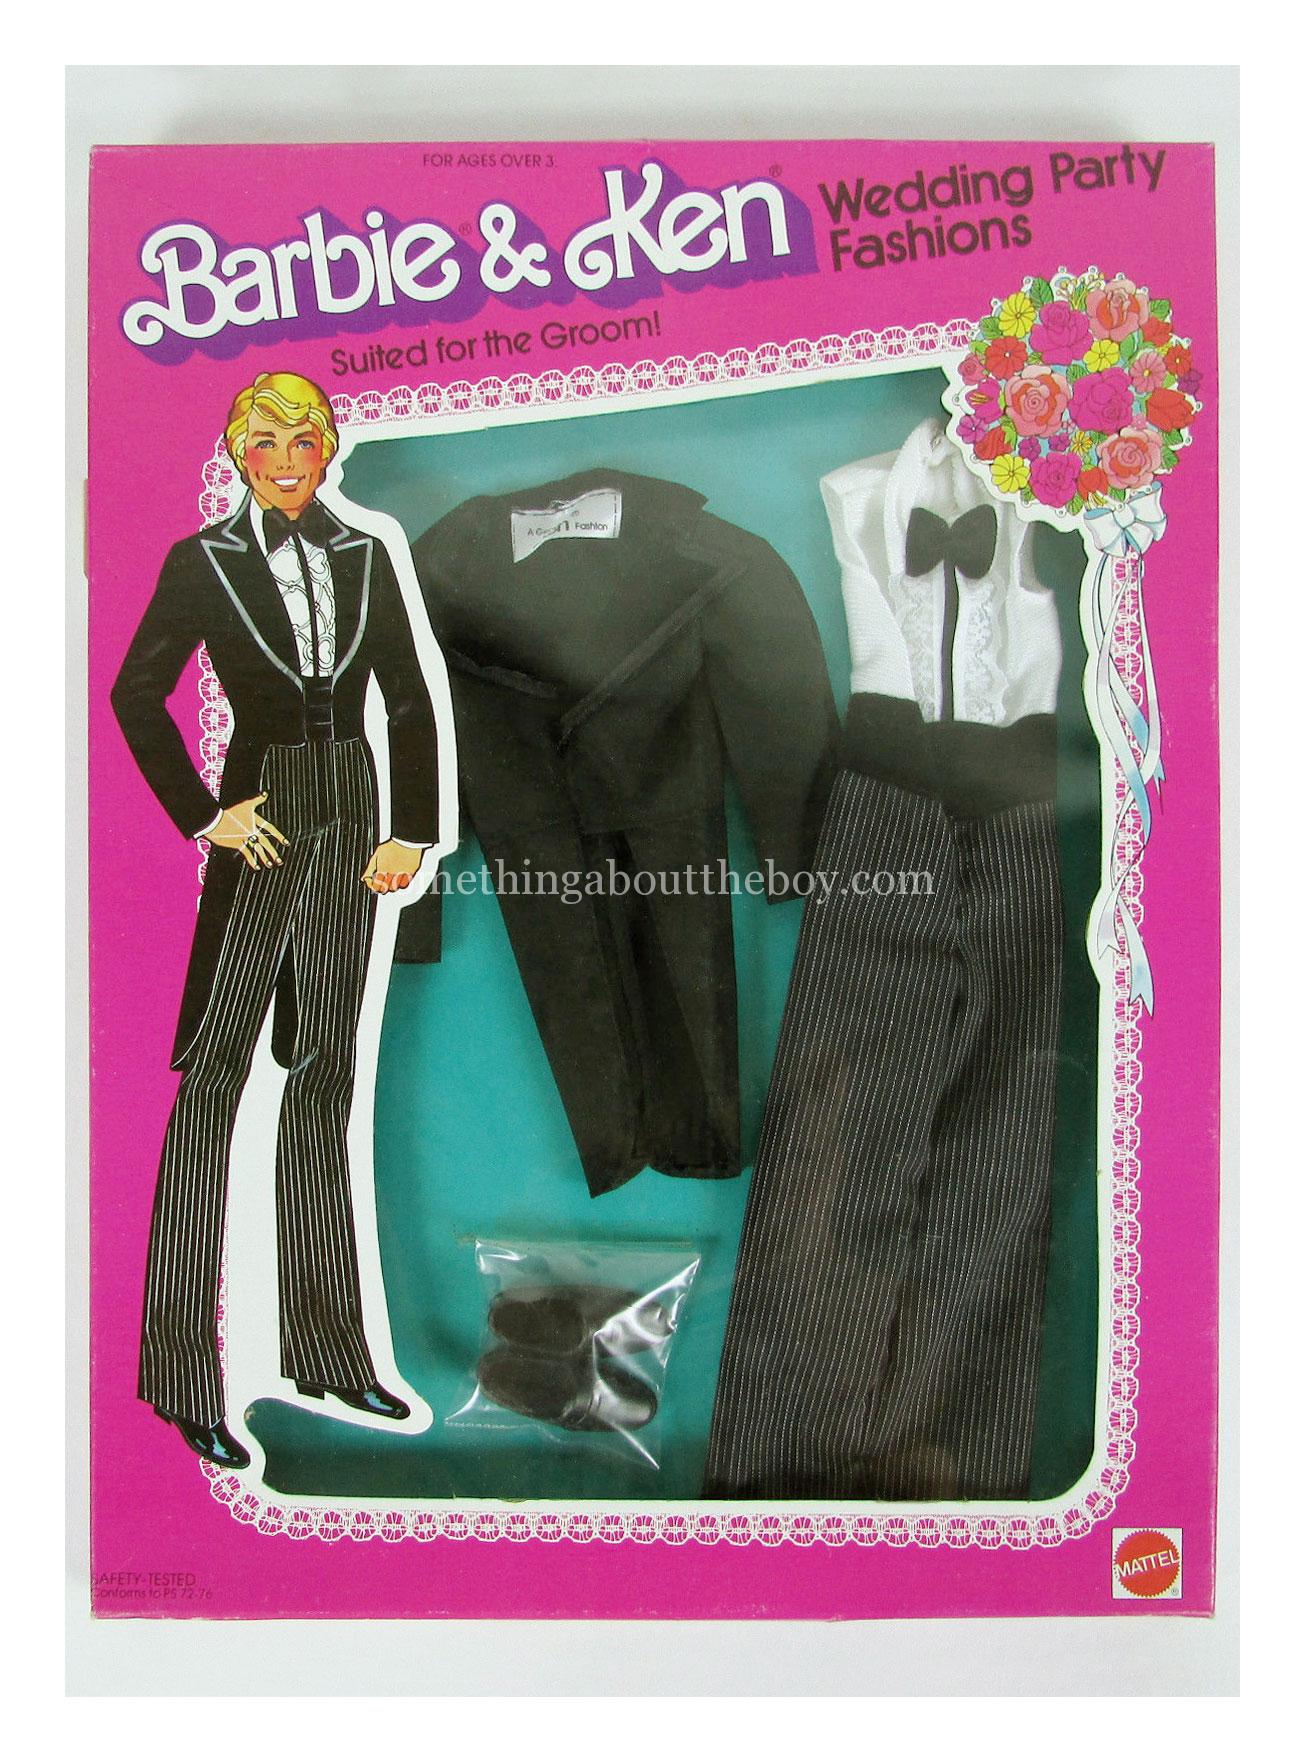 1980 Wedding Party Fashions #1418 (in 1981 version packaging)